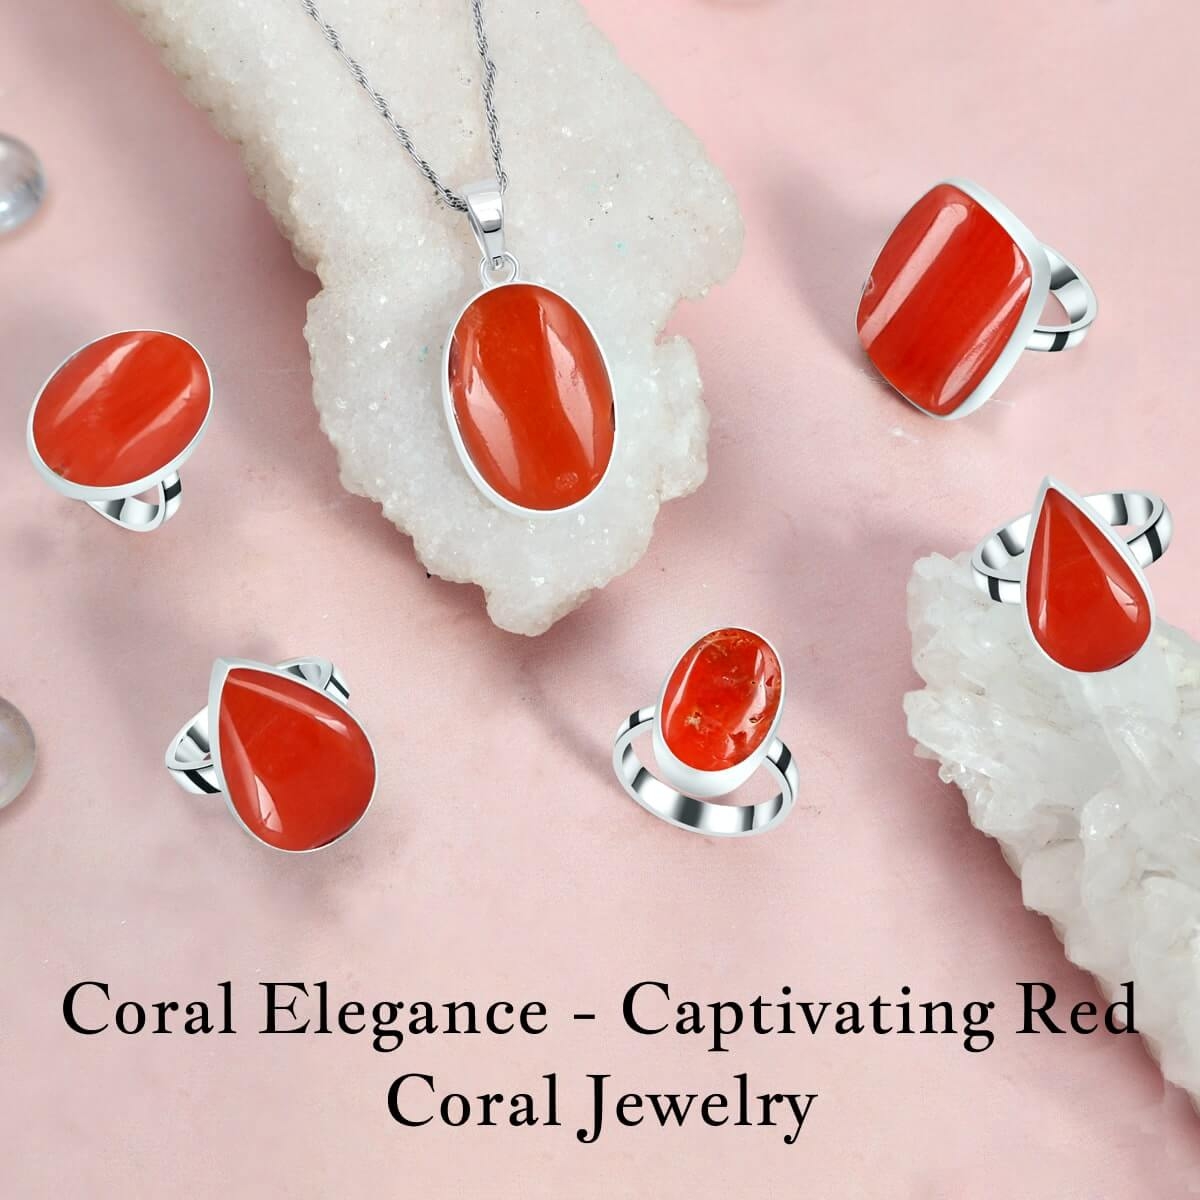 Does coral jewelry make a good gift?